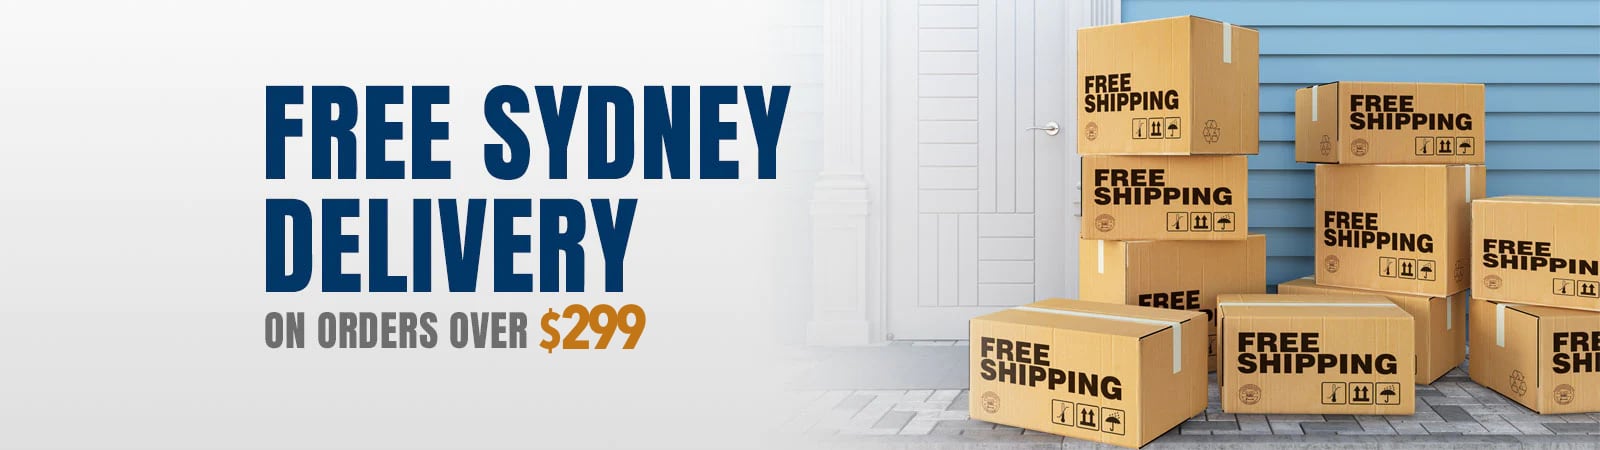 Packstore Australia Free Delivery Sydney Shipping Banner Promotion Offer